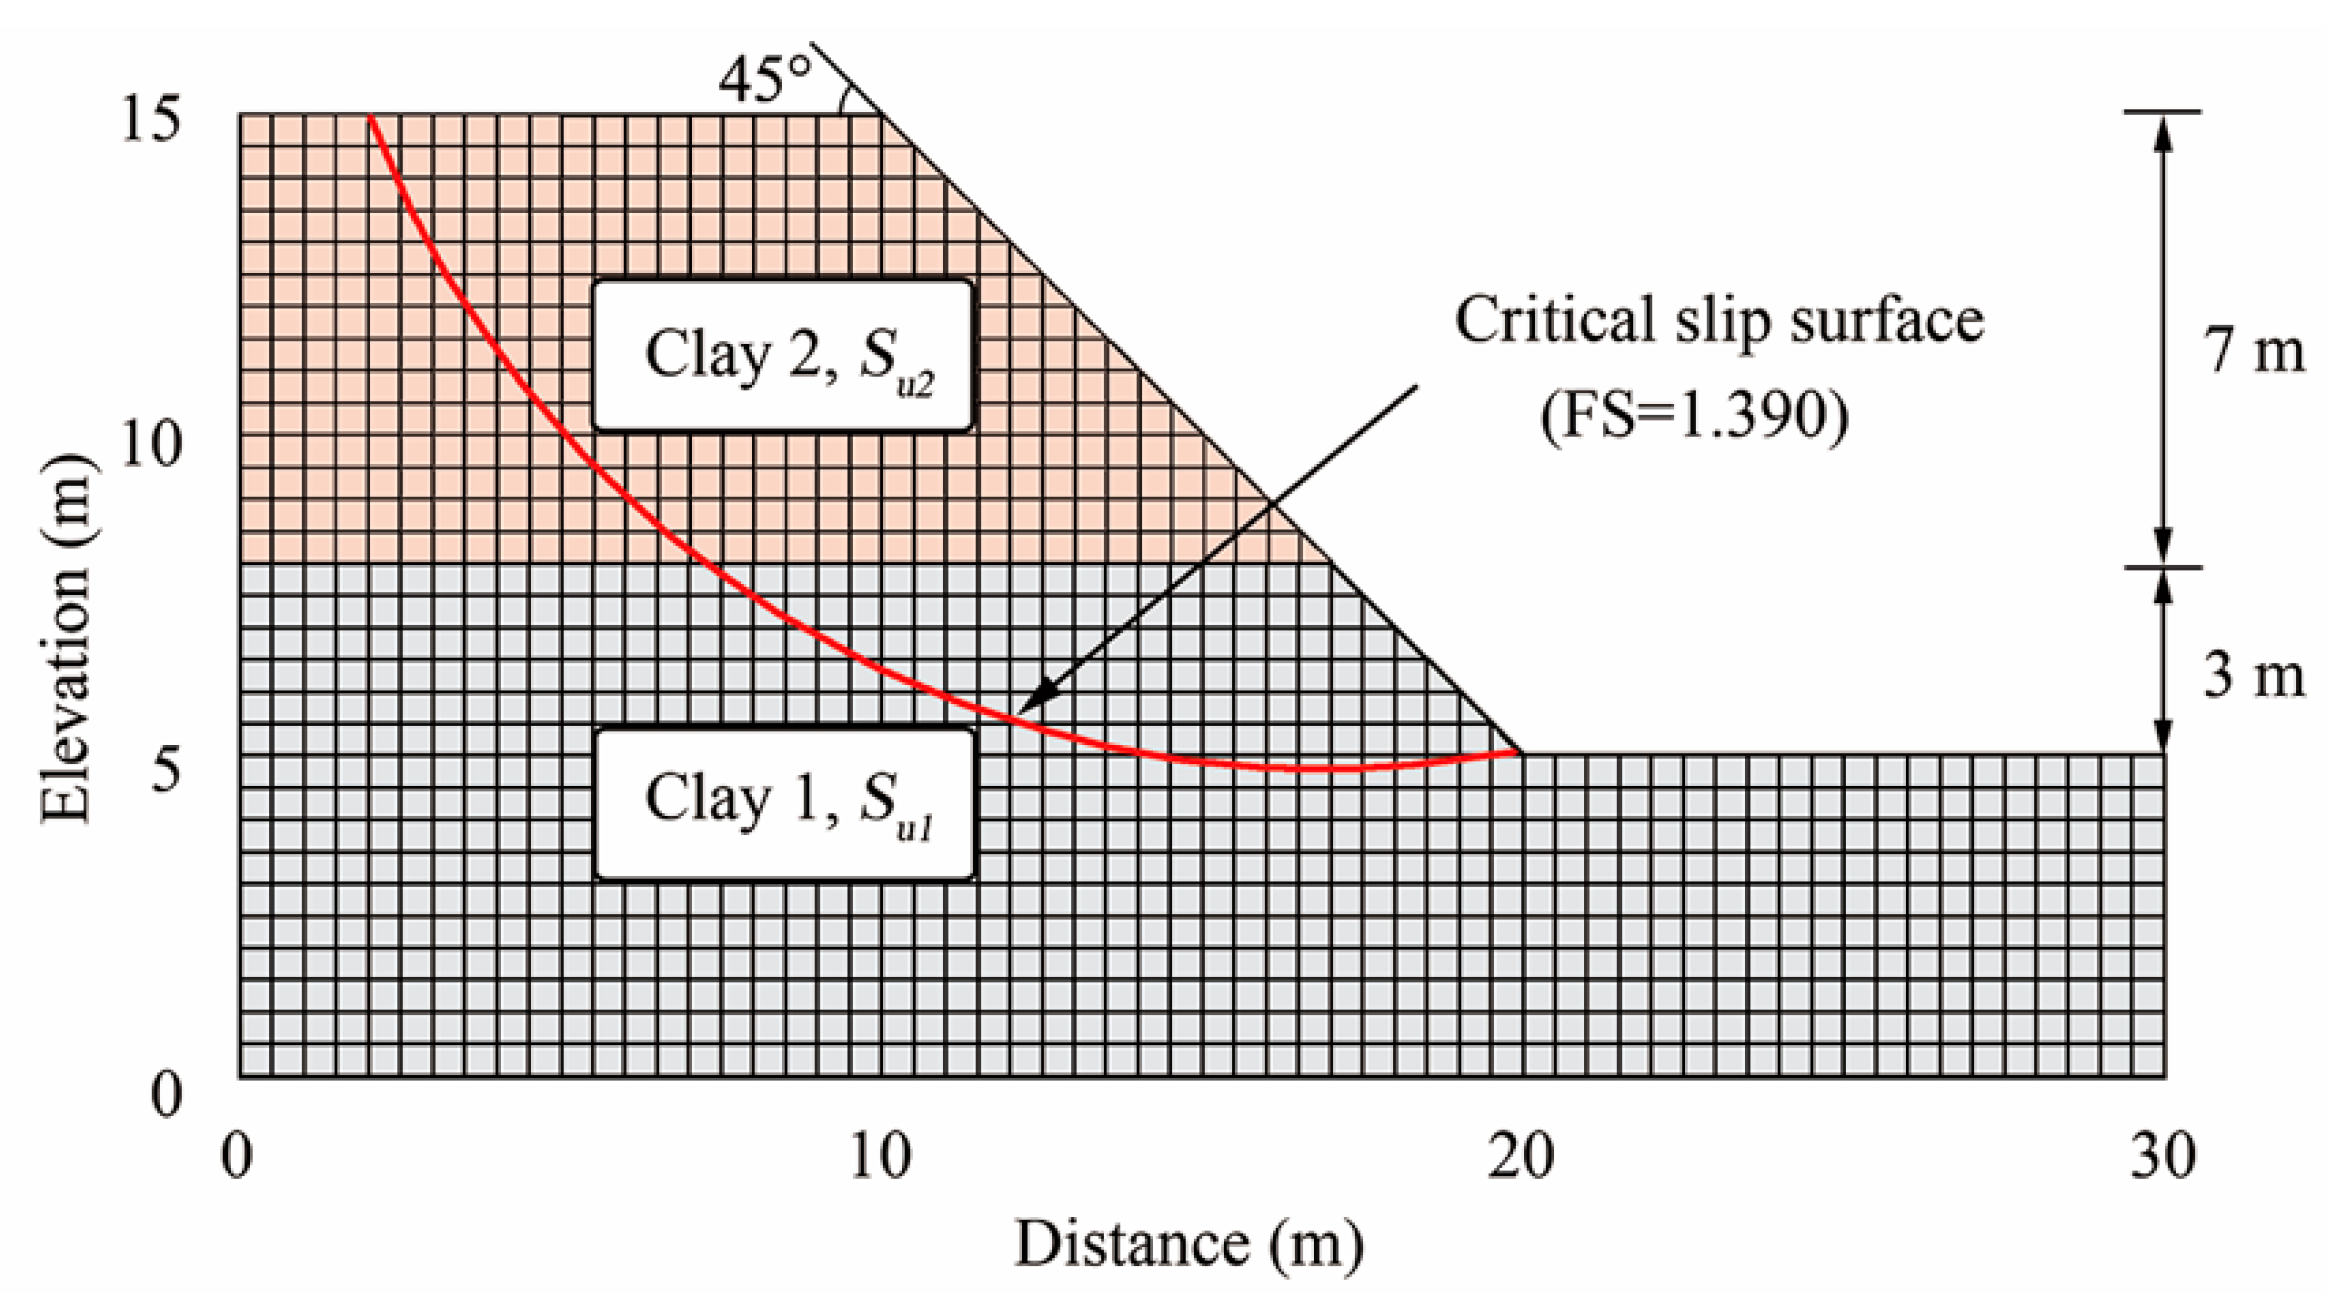 Full article: Representative slip surface identification and reliability  analysis of slope systems in spatially variable soils